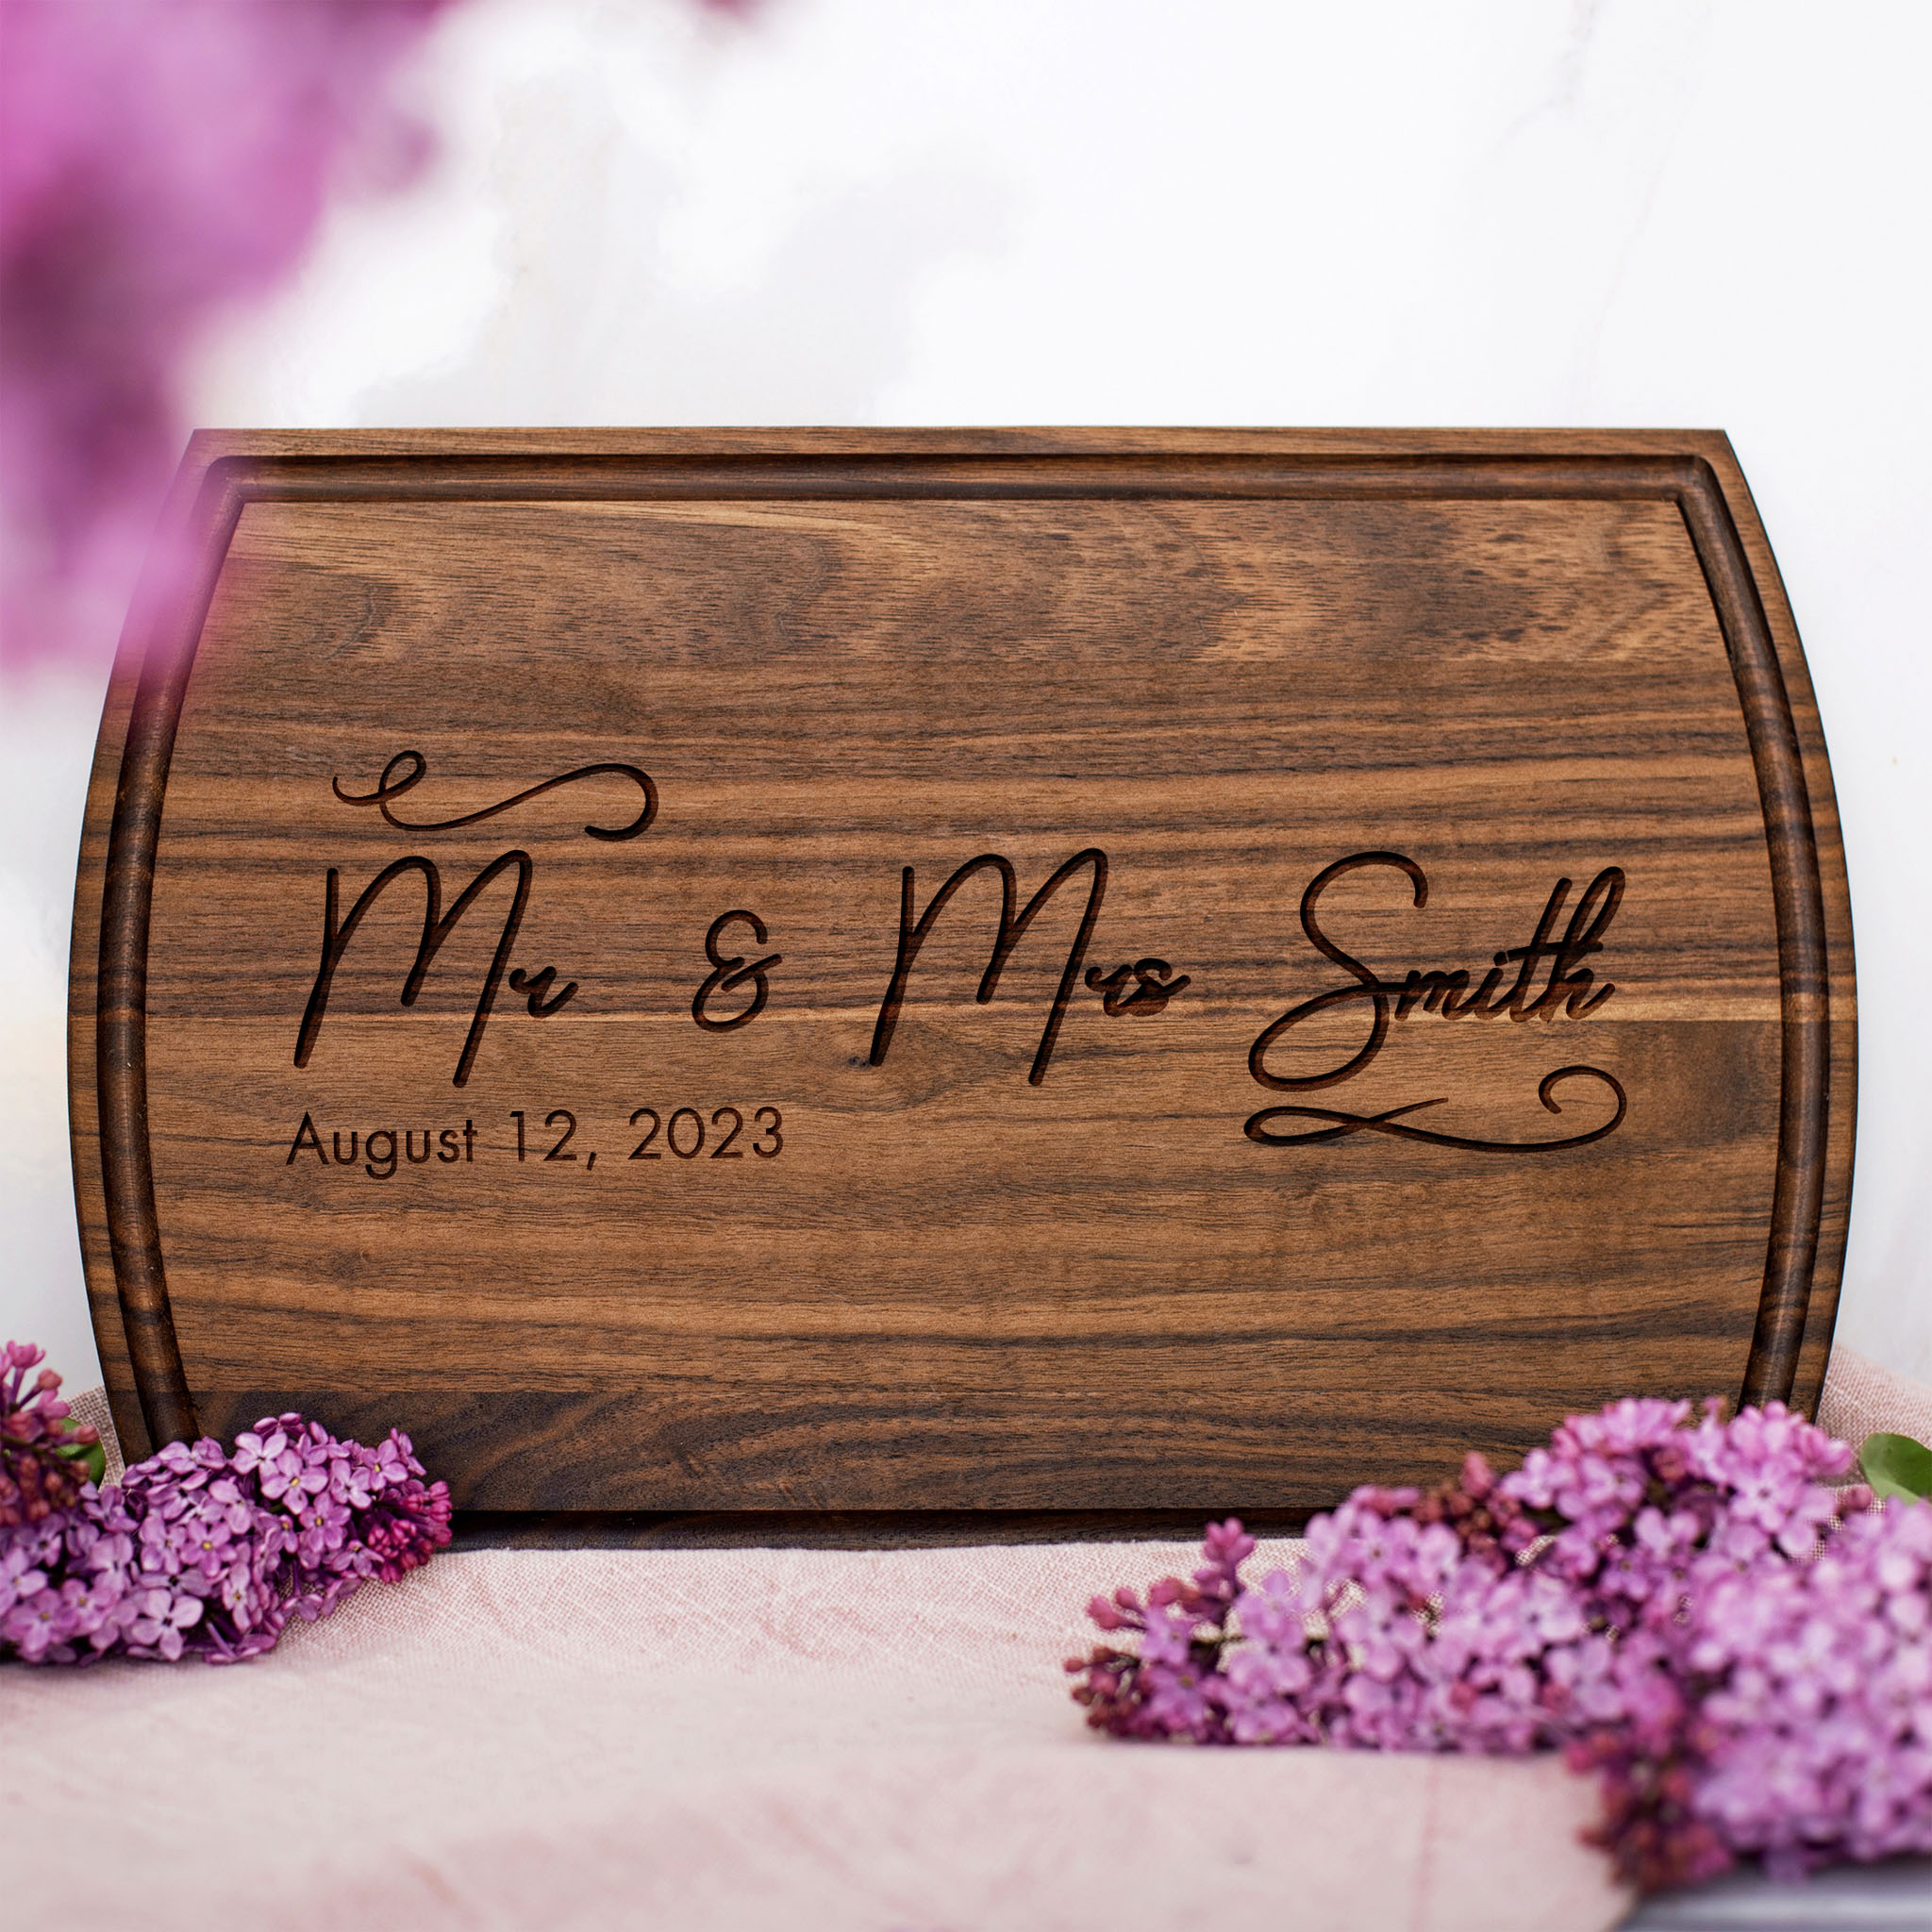 Amazing Personalized Gifts to Add to Your Wedding Gift Registry - User's  blog